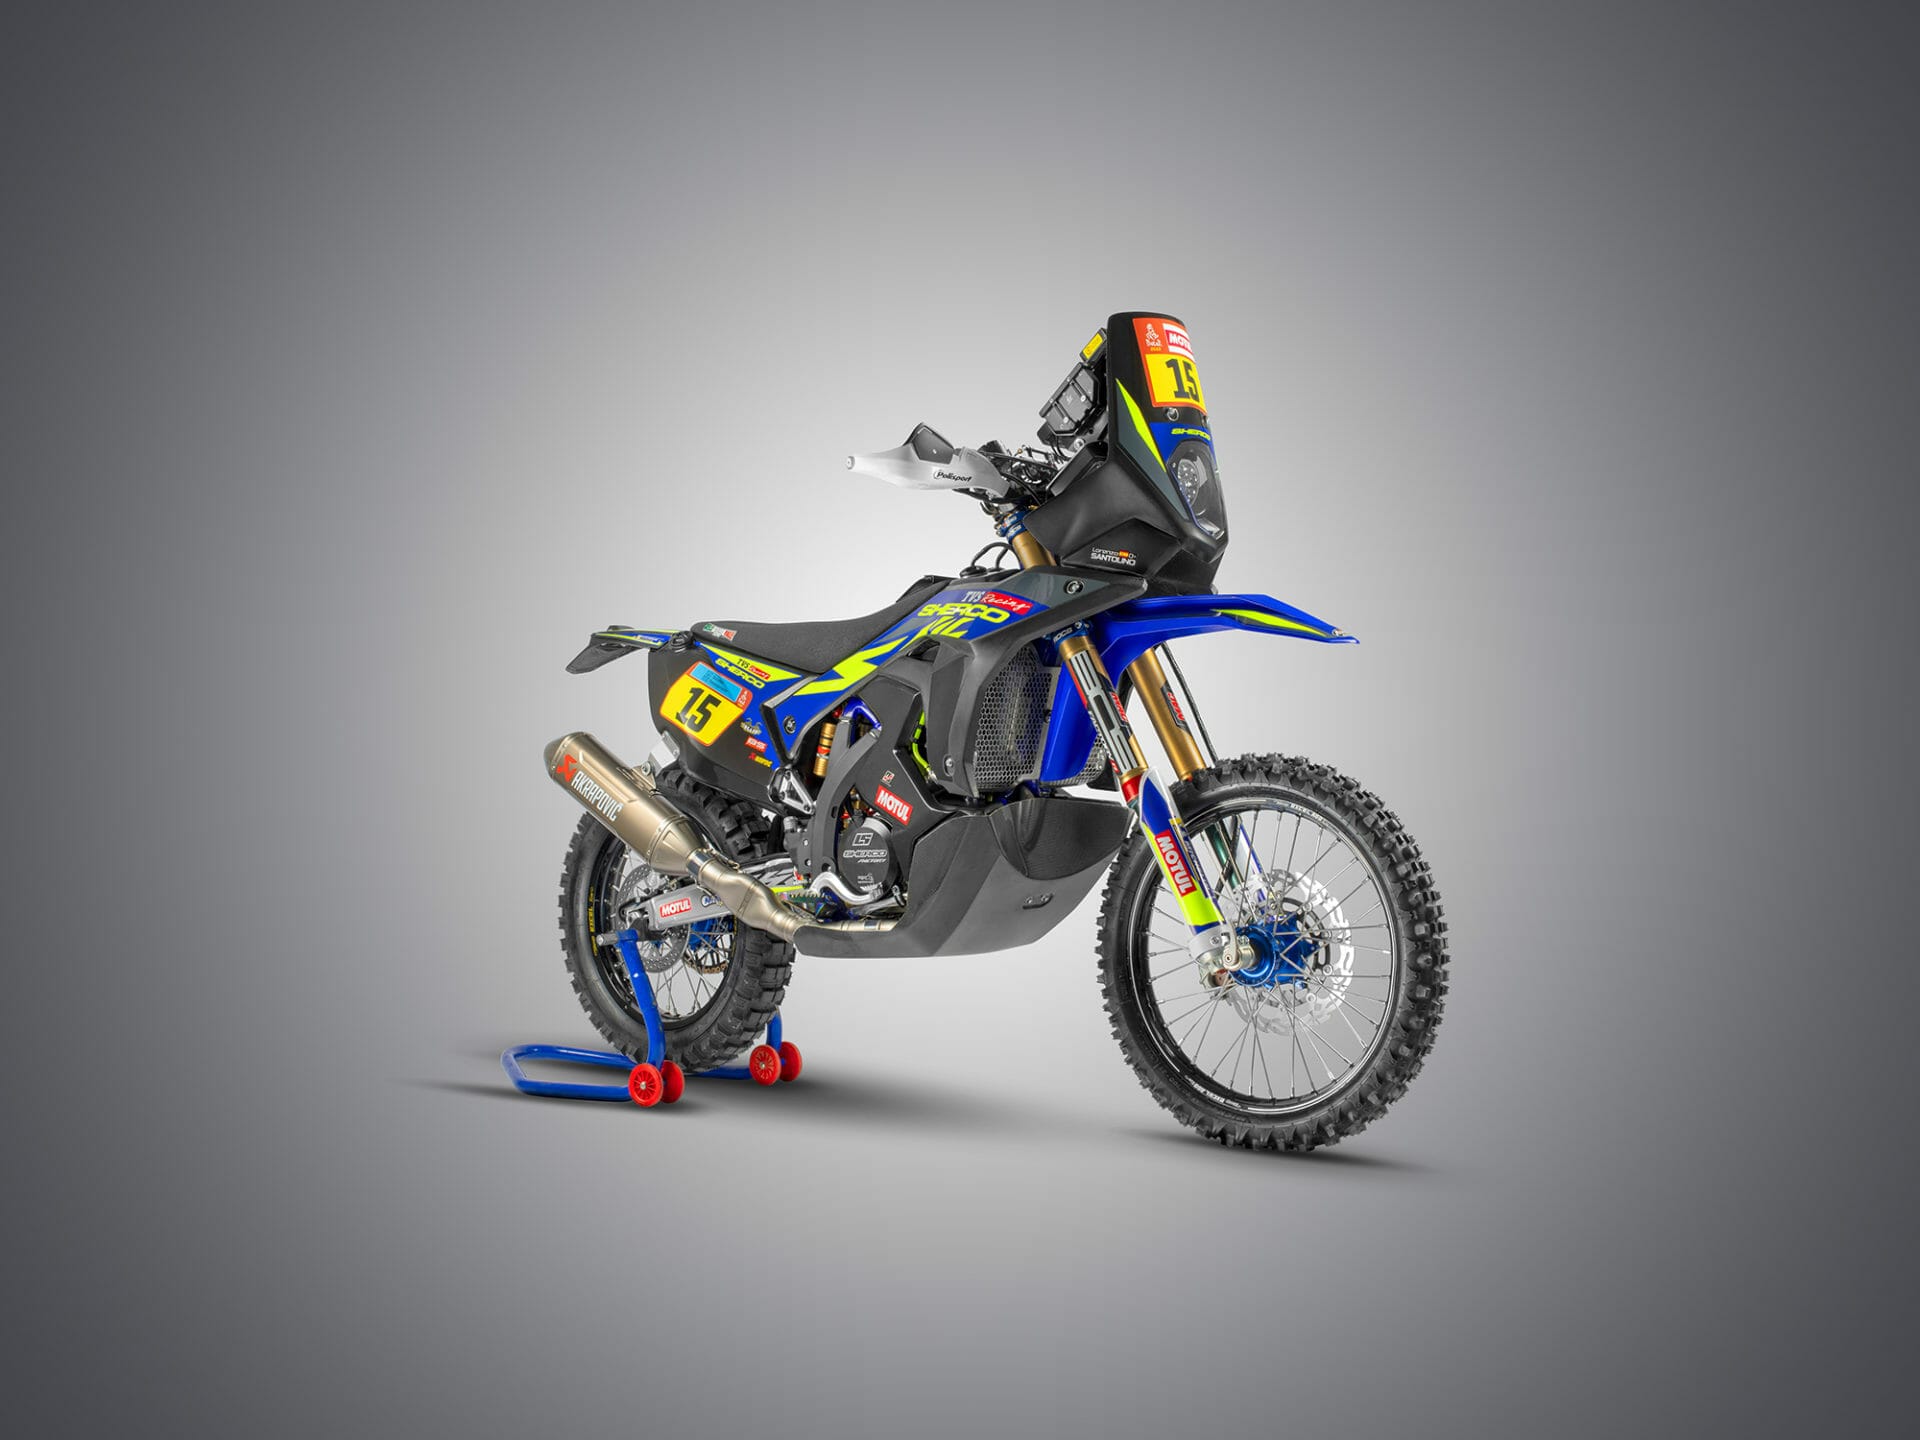 SHERCO 450 SEF RALLY
- also in the MOTORCYCLES.NEWS APP